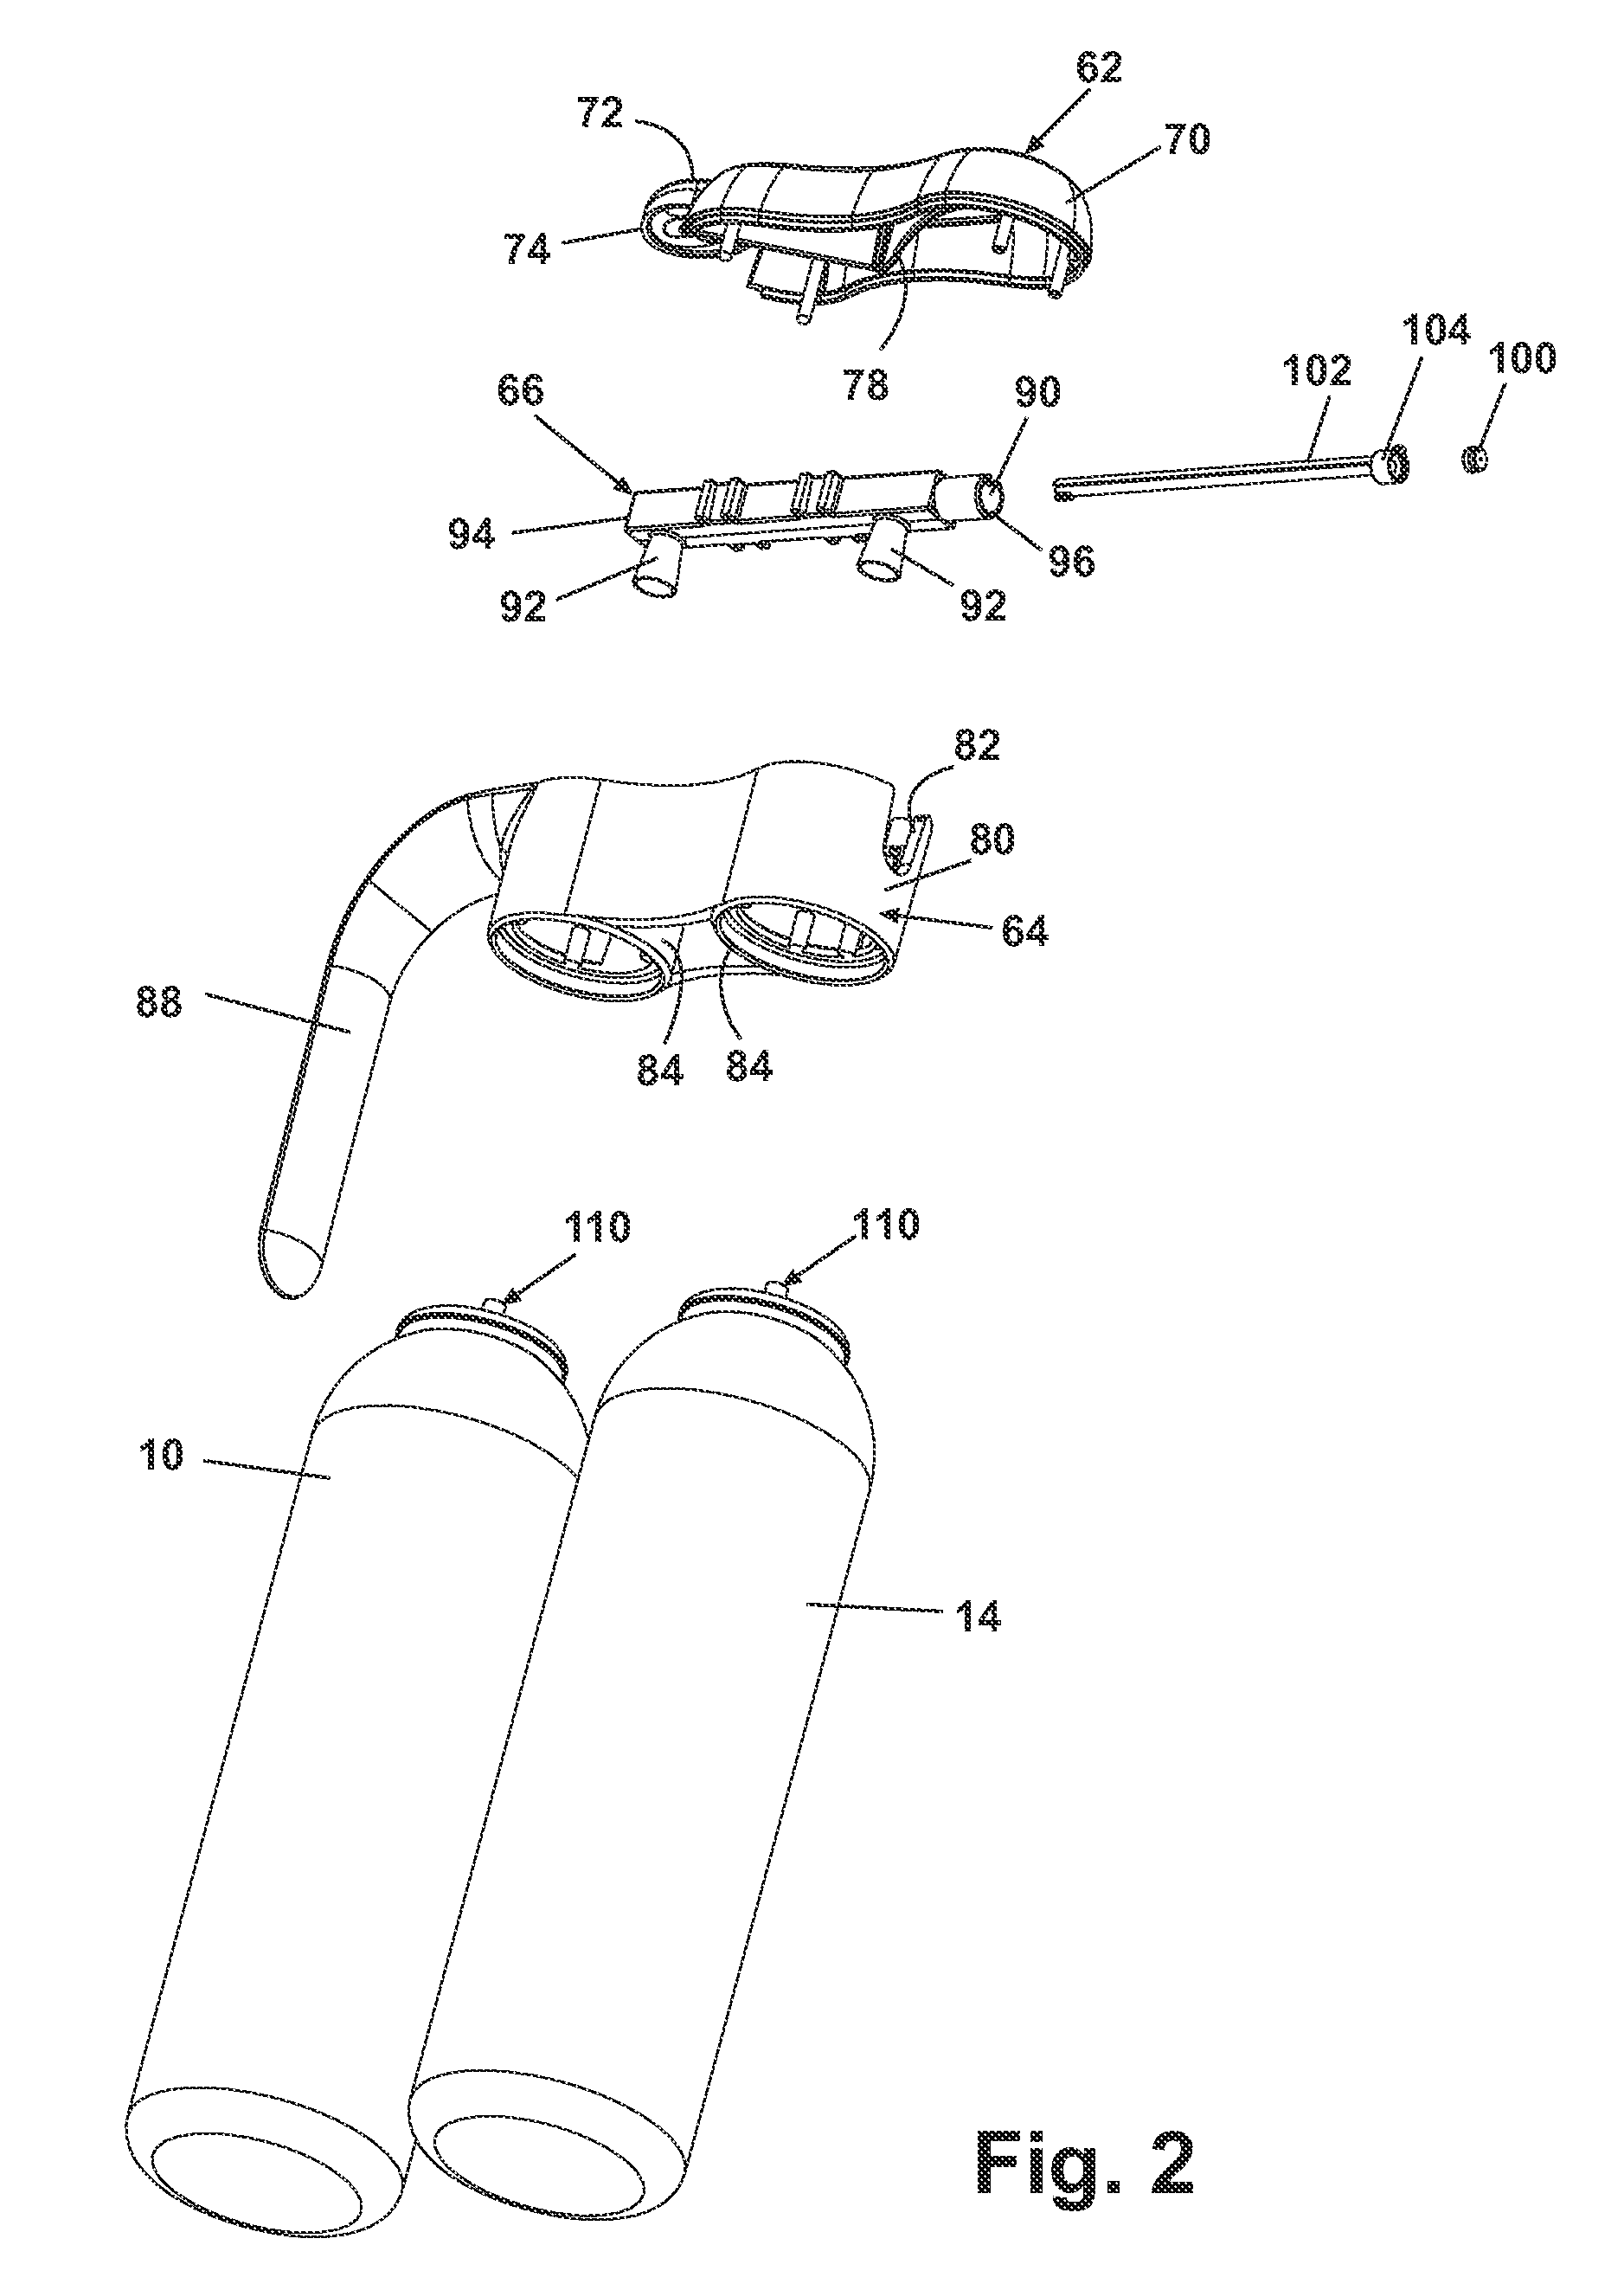 Manual sprayer with dual bag-on-valve assembly